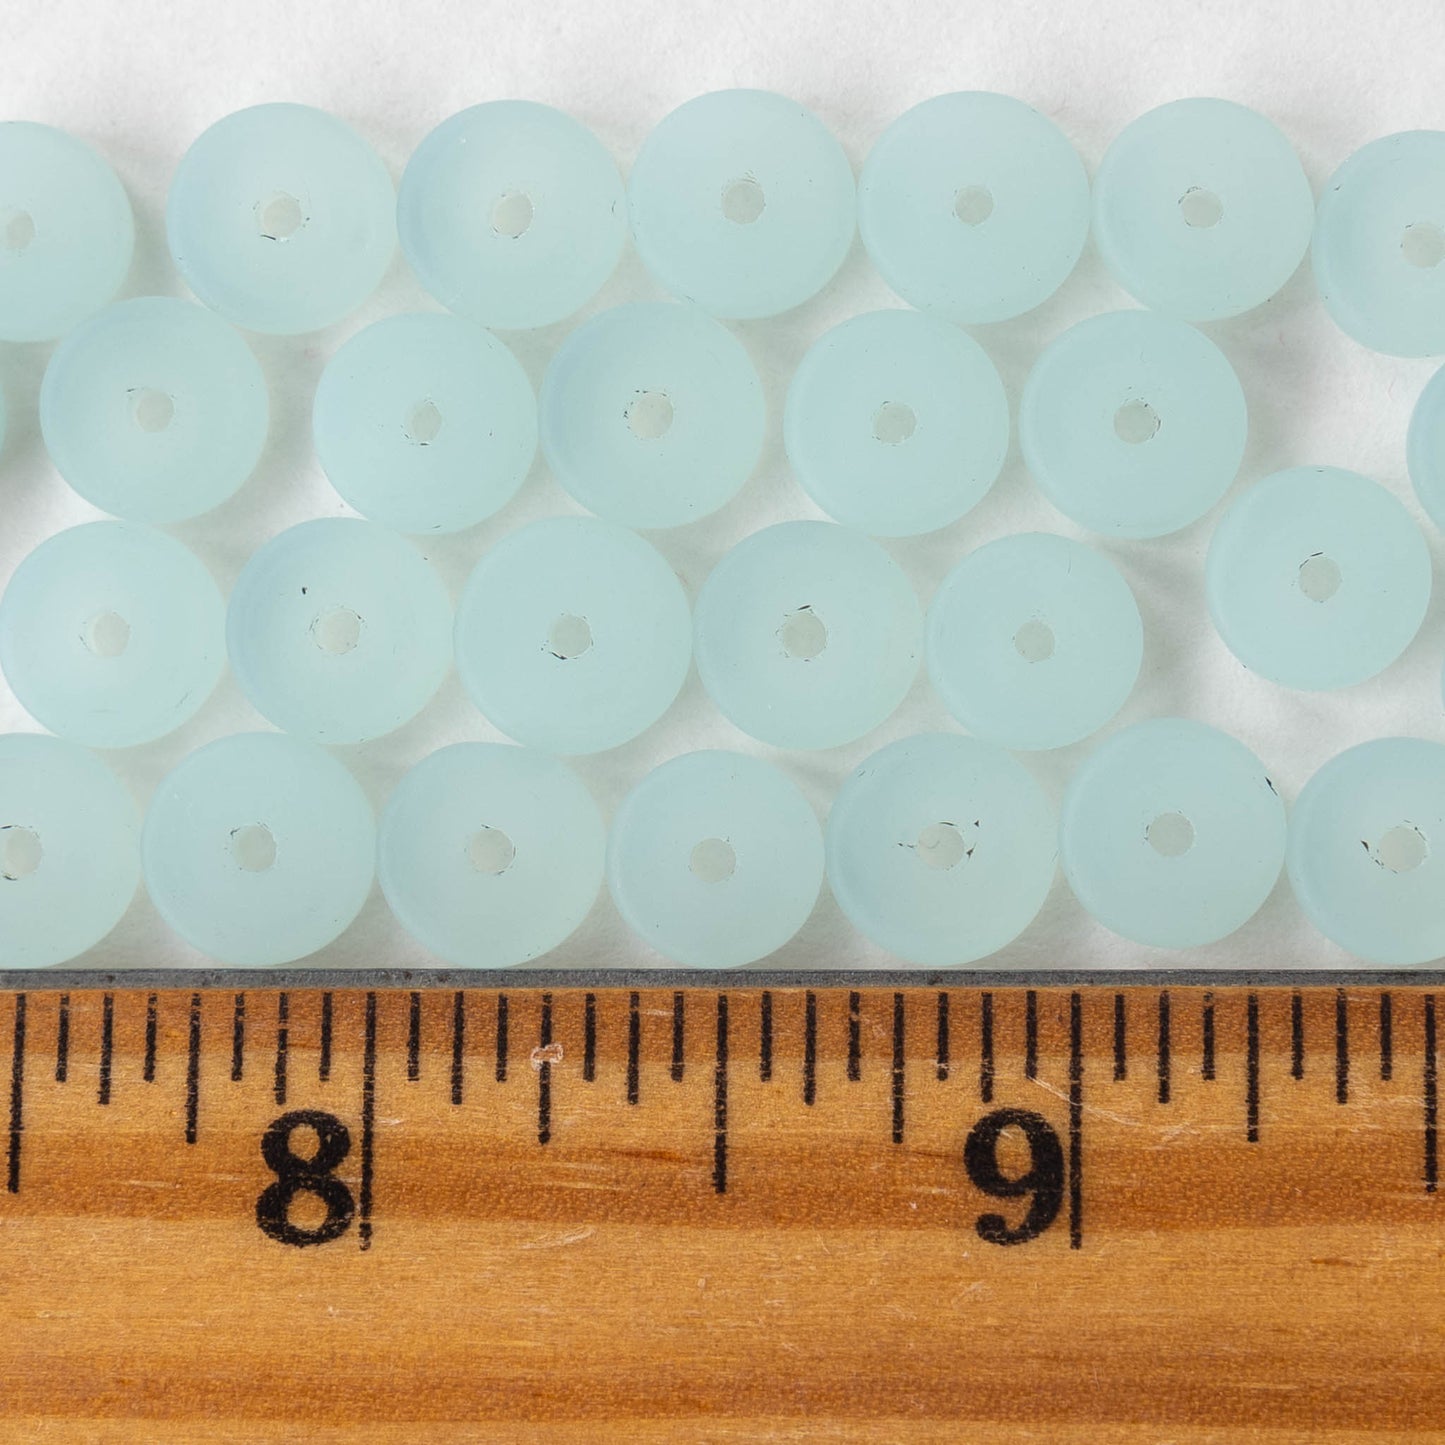 9mm Frosted Glass Heishi Beads - Opaque Frosted Light Aqua - 72 Beads